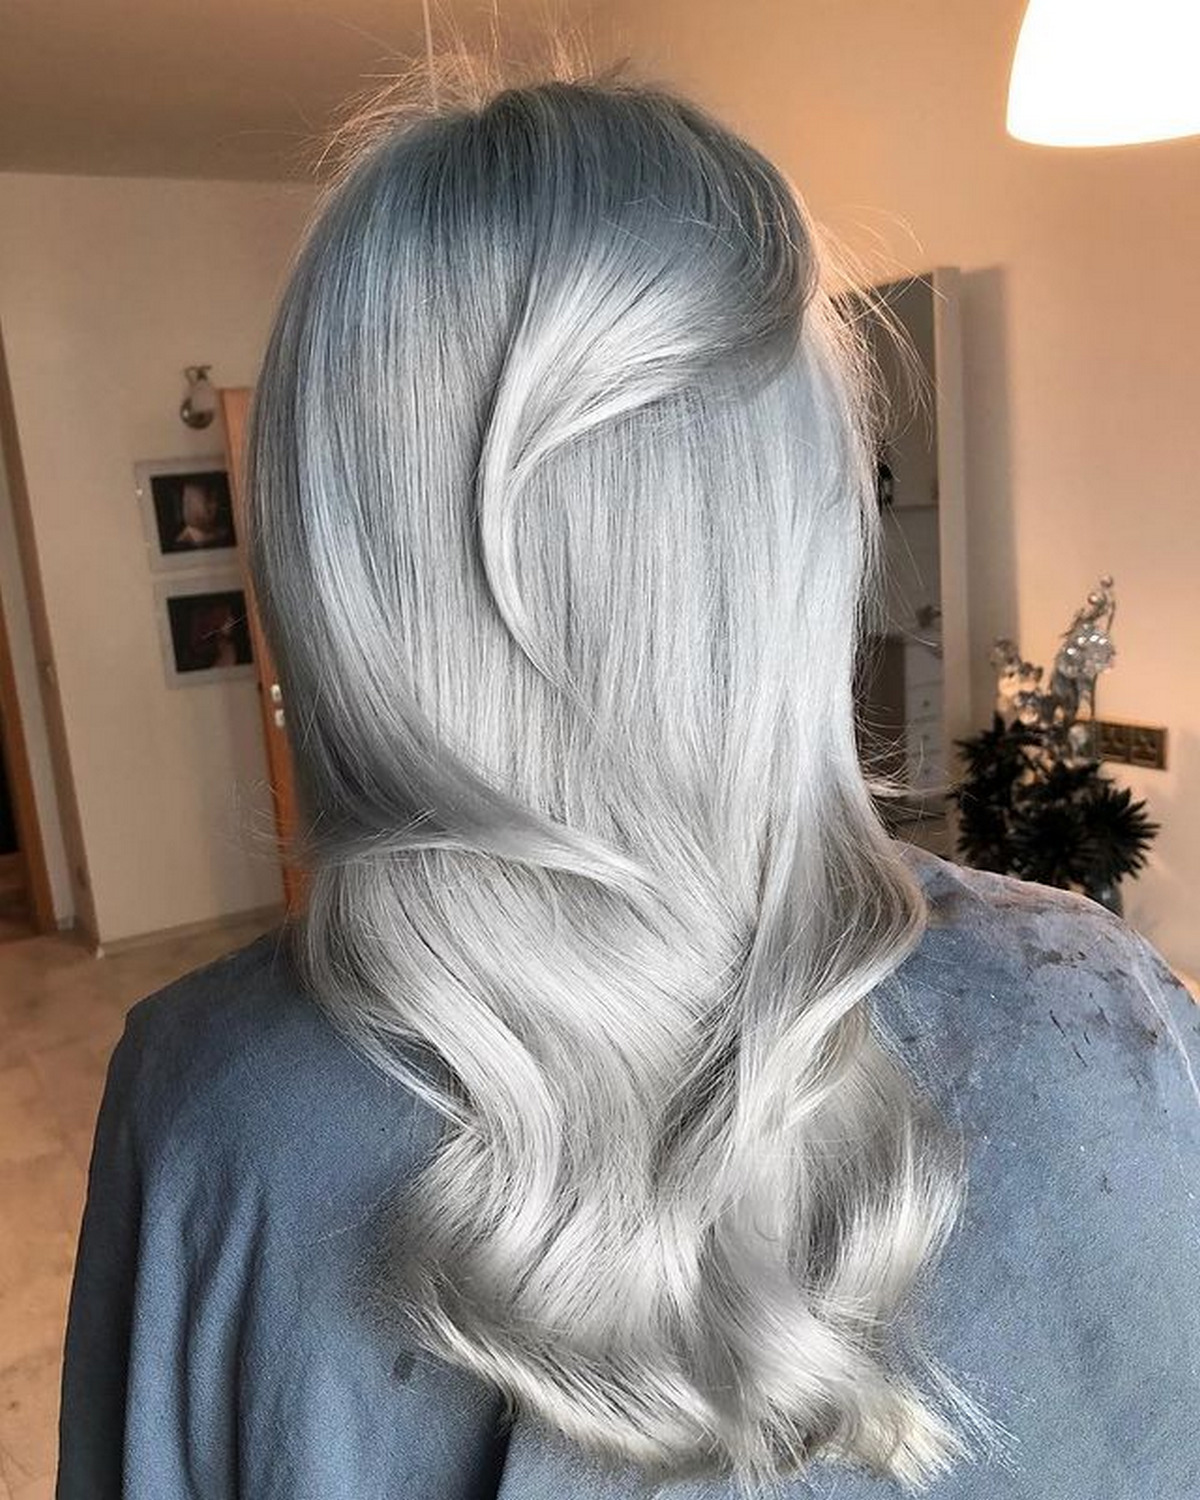 35 Beautiful Silver Hair Color Ideas to Inspire Your Look - Hood MWR